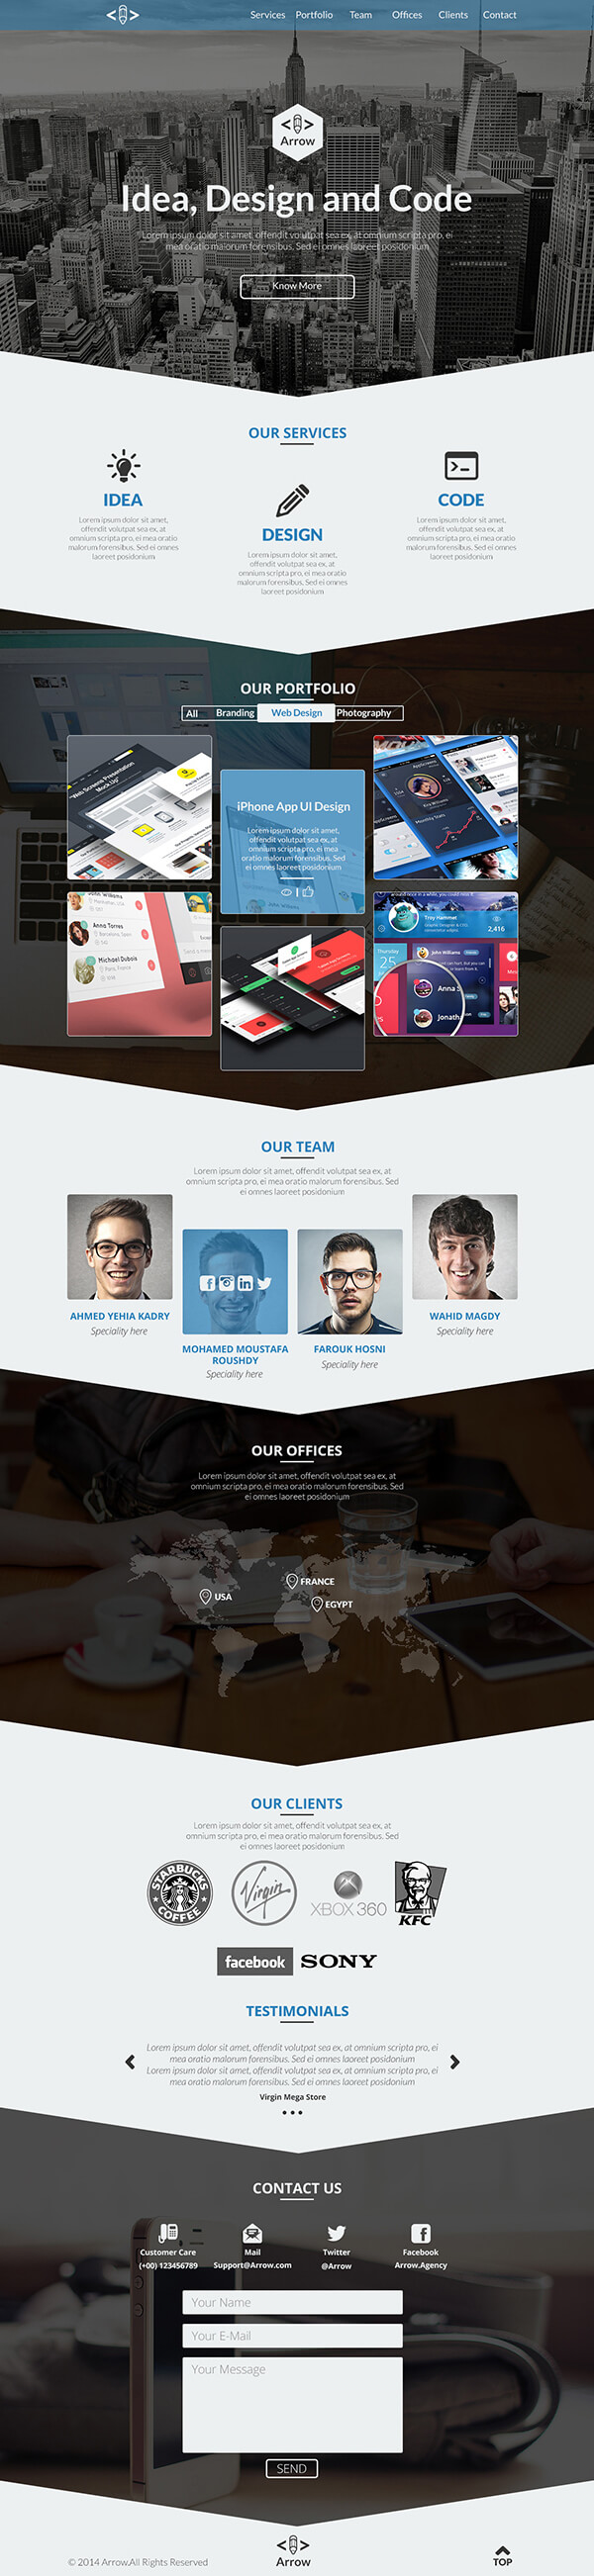 Psd Templates: 20 One Page Free Web Templates | Freebies In Single Page Brochure Templates Psd